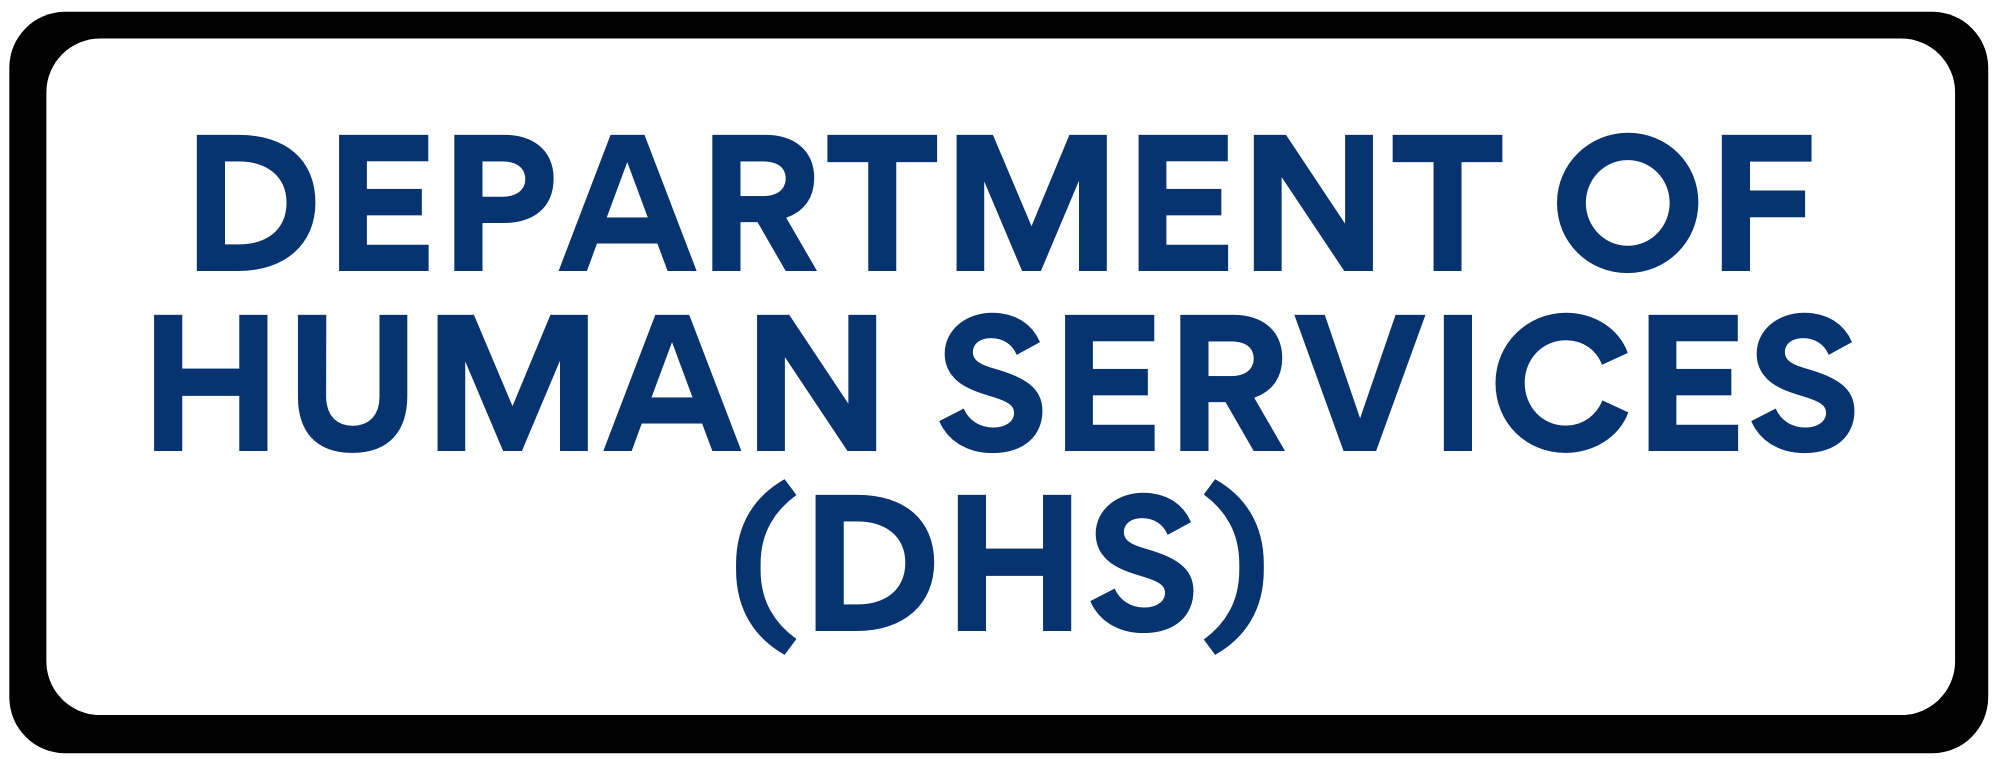 Department of Human Services 